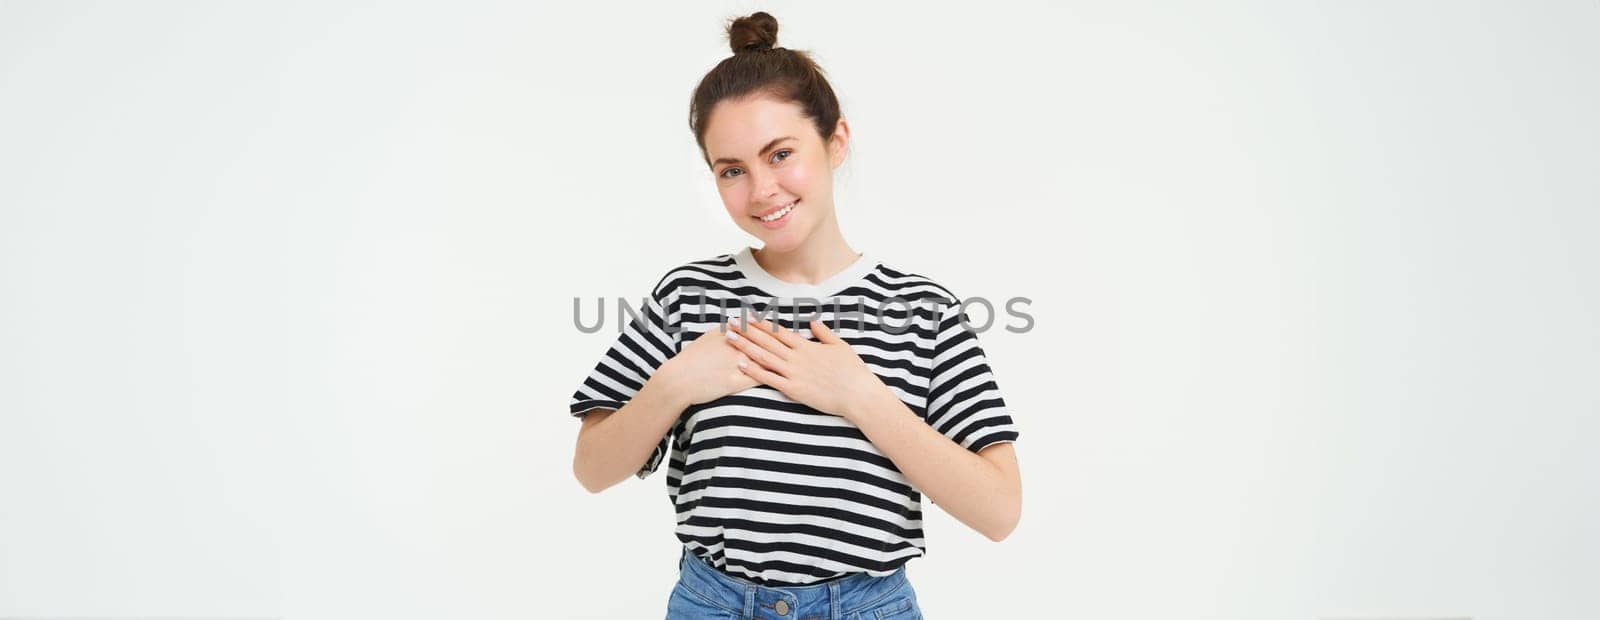 Young smiling woman, feels gratitude, thankful for something, holds hands on heart and looks tender at camera, standing over white background.